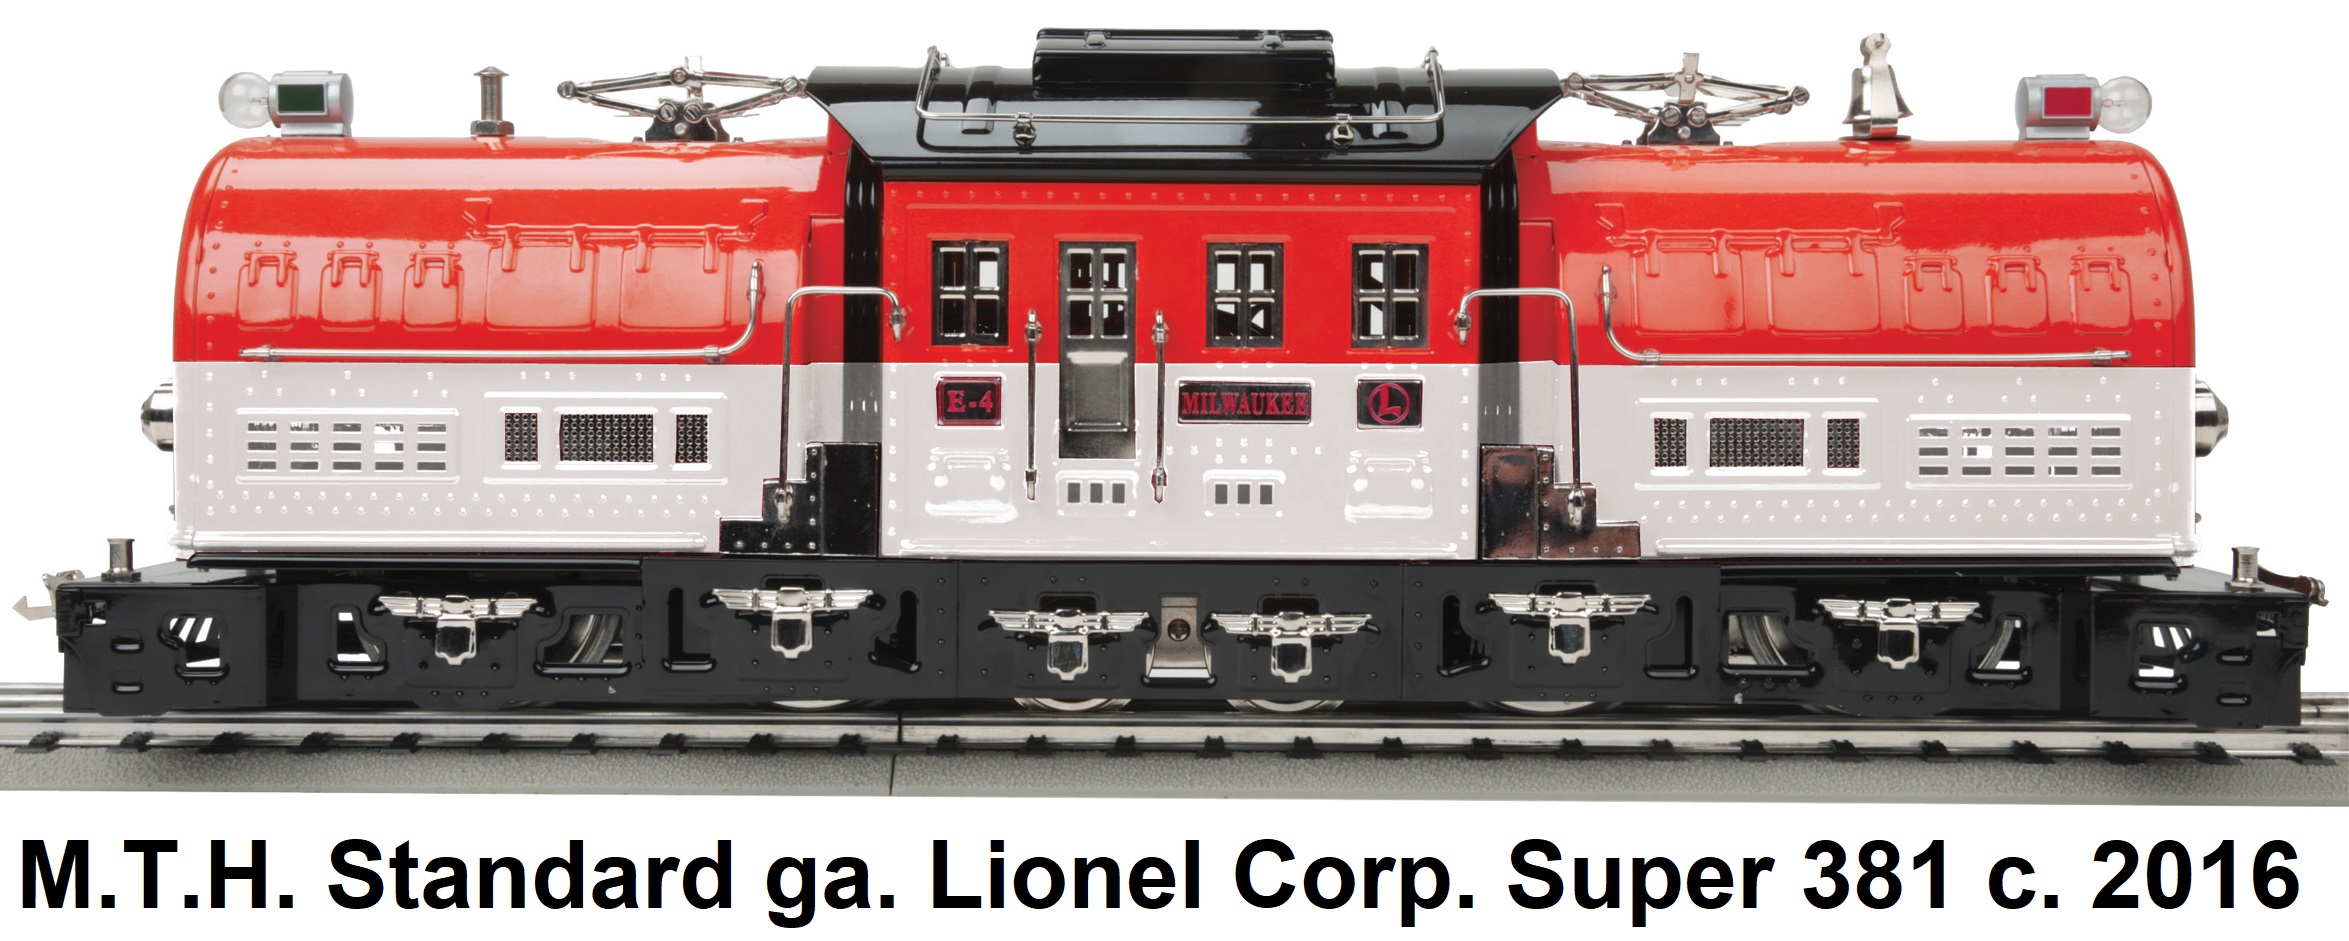 MTH Standard gauge Lionel Corporation Tinplate Super 381 Electric loco with Proto-Sound 3.0 made 2016